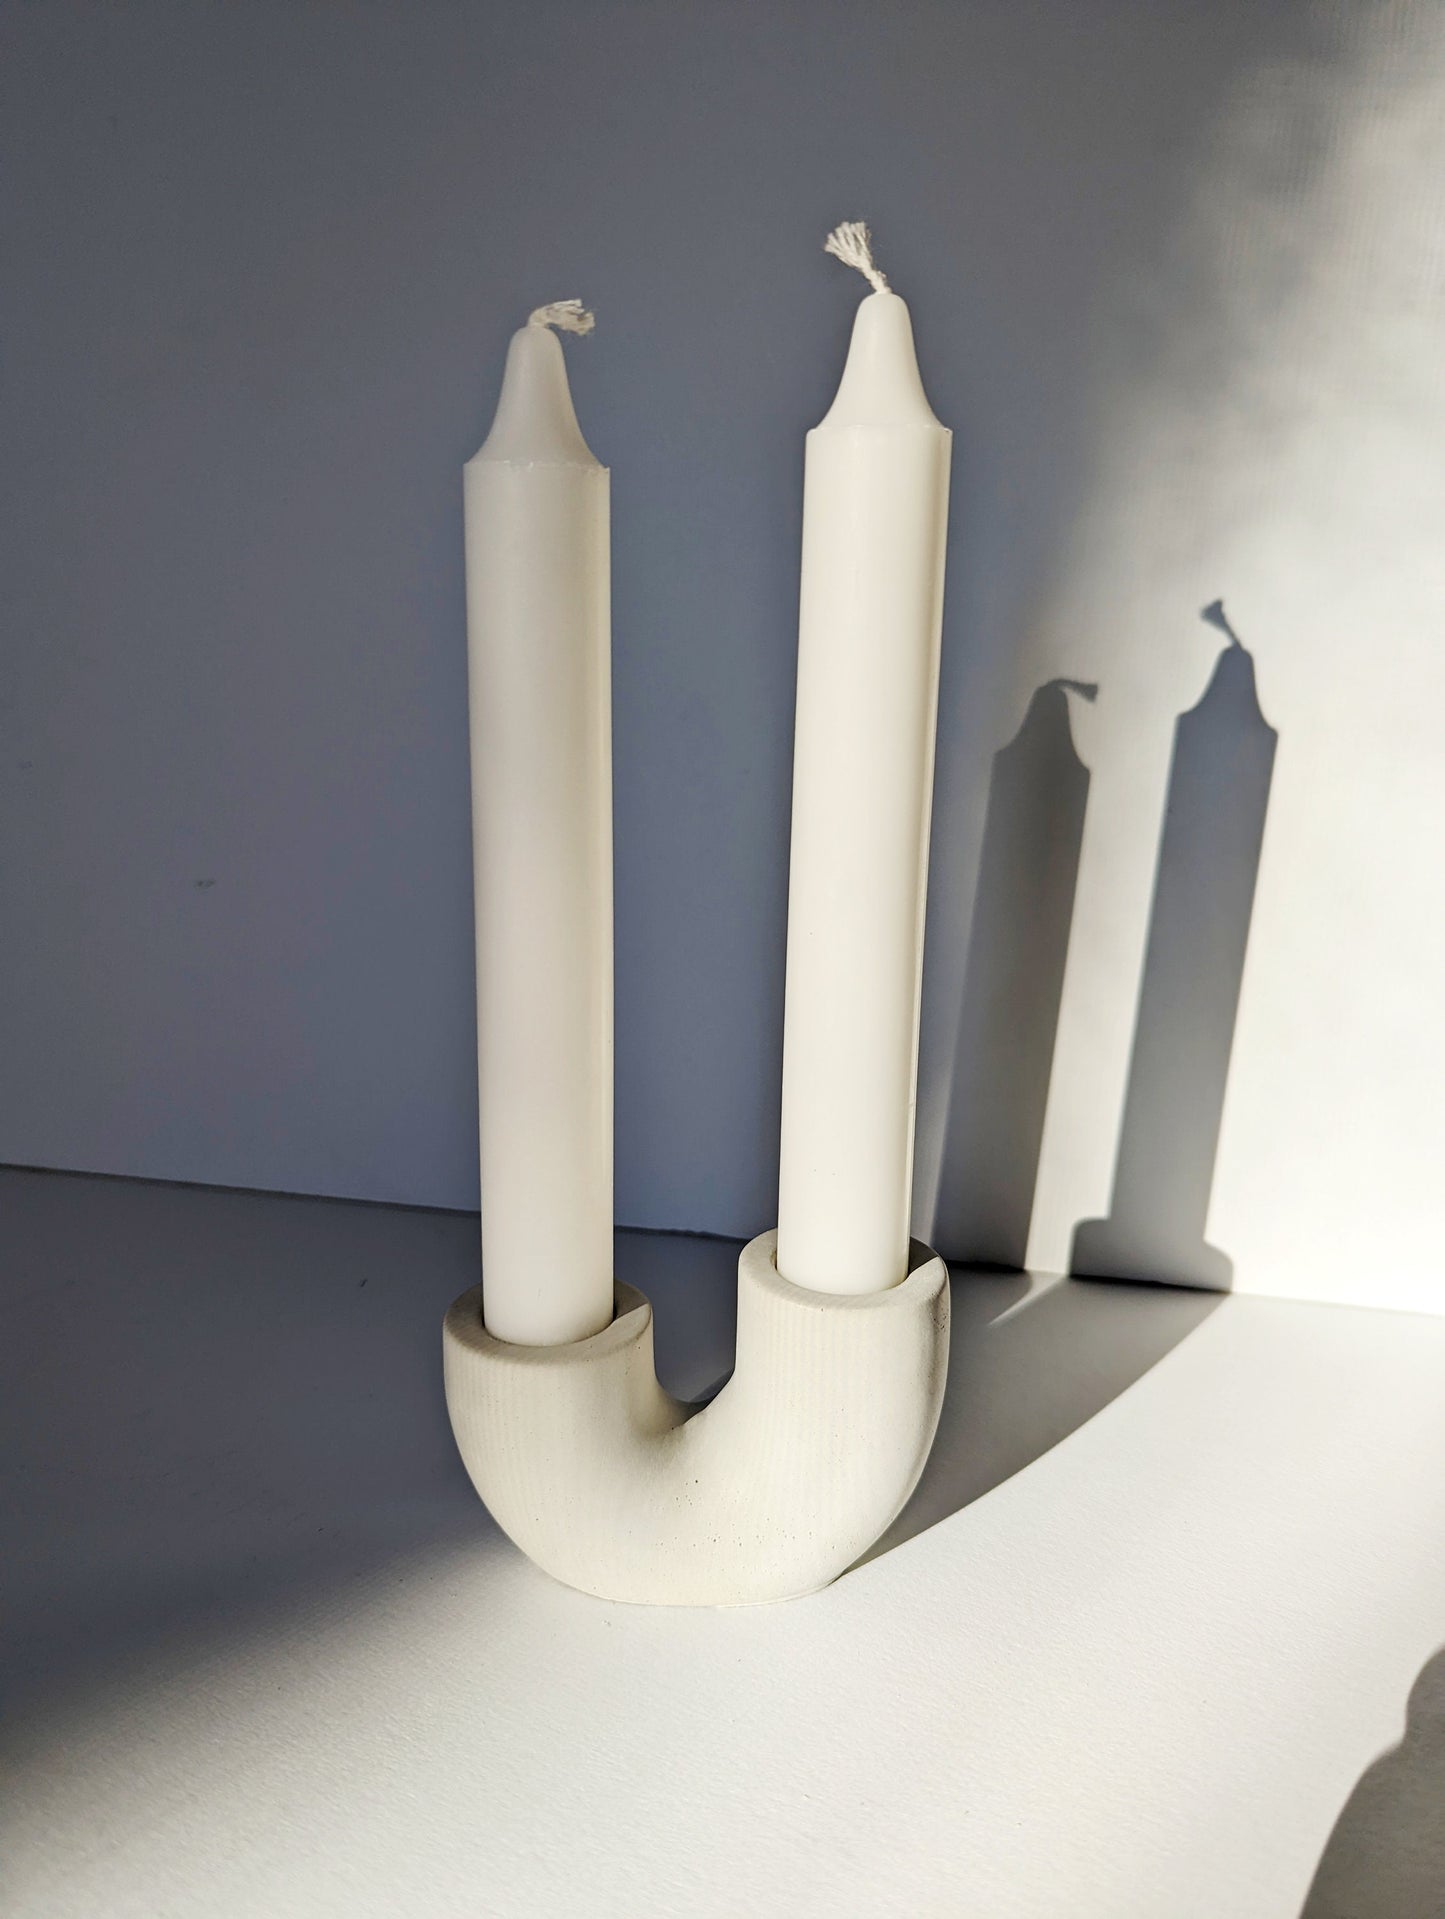 Candle Snuggers Foam Pads Make Taper Candles Stand Straight